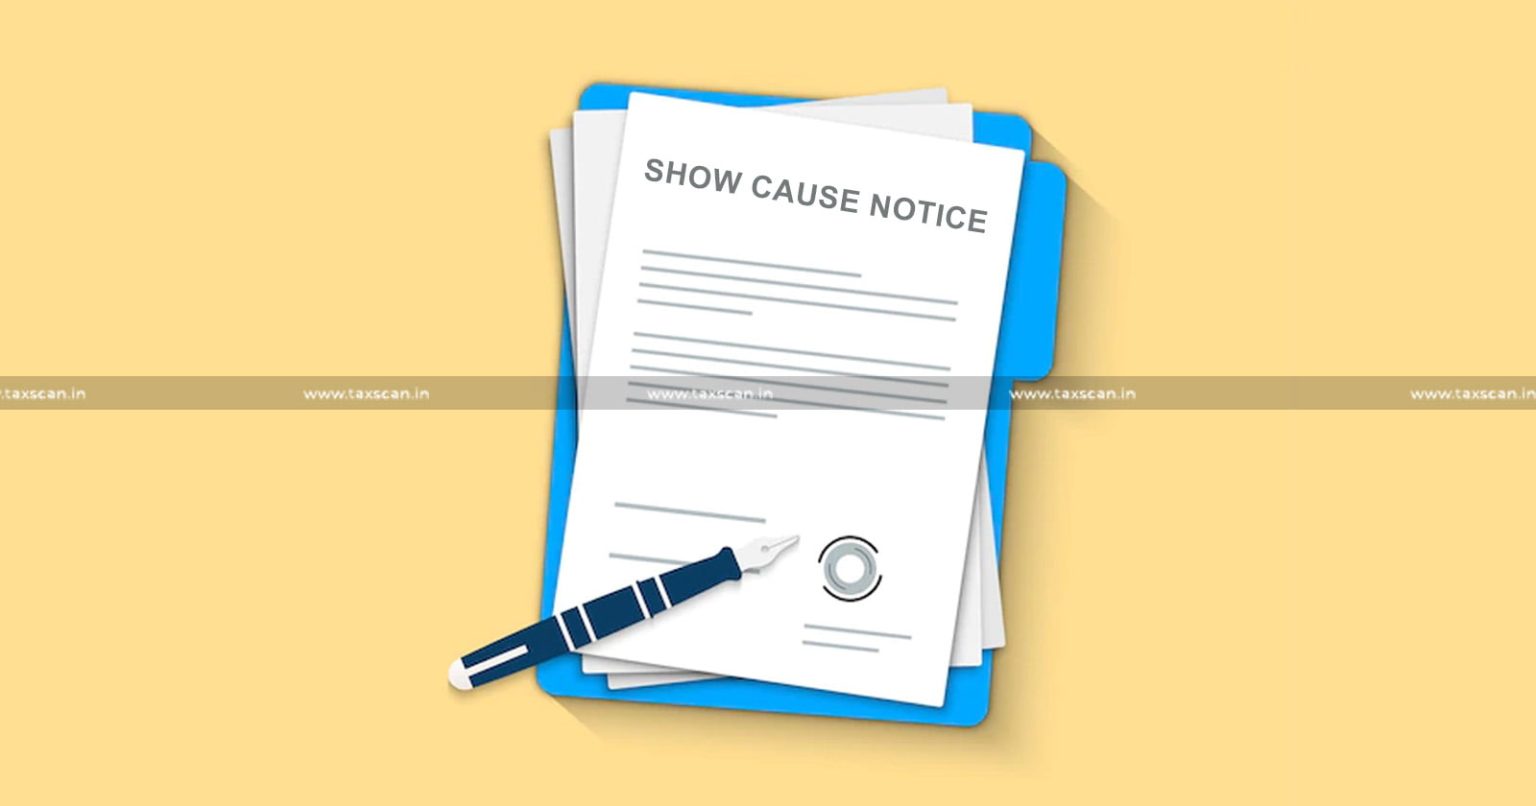 Show Cause Notice - Dissatisfaction - Insufficient Evidence - Filing Additional Evidence - ITAT - Re-adjudication - taxscan